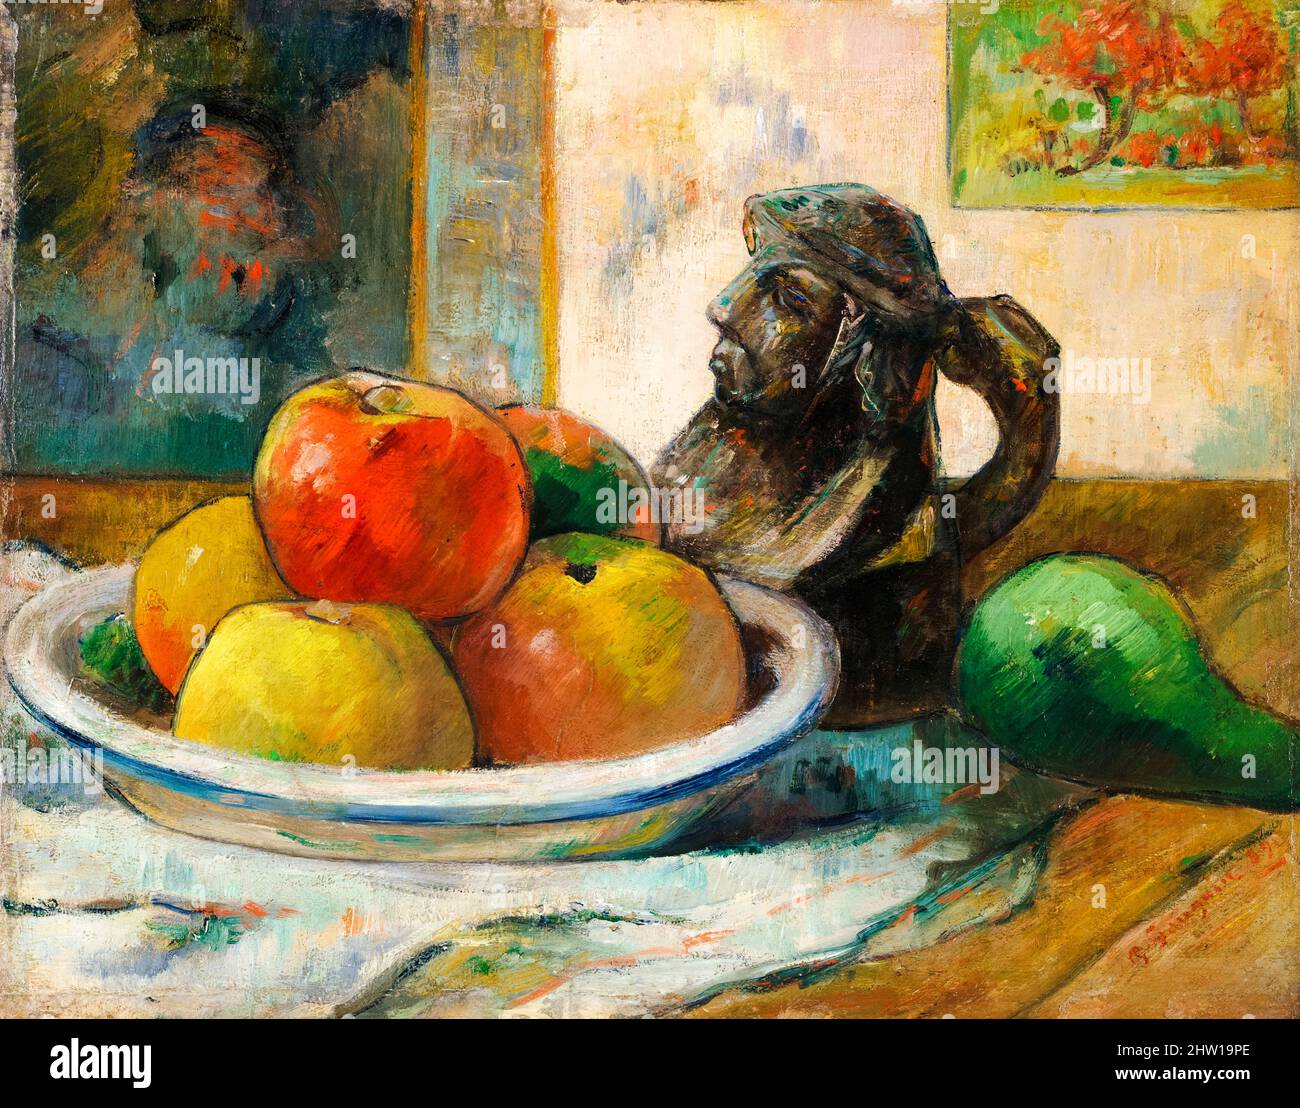 Paul Gauguin, Still Life with Apples, a Pear, and a Ceramic Portrait Jug, painting in oil on paper mounted on panel, 1889 Stock Photo